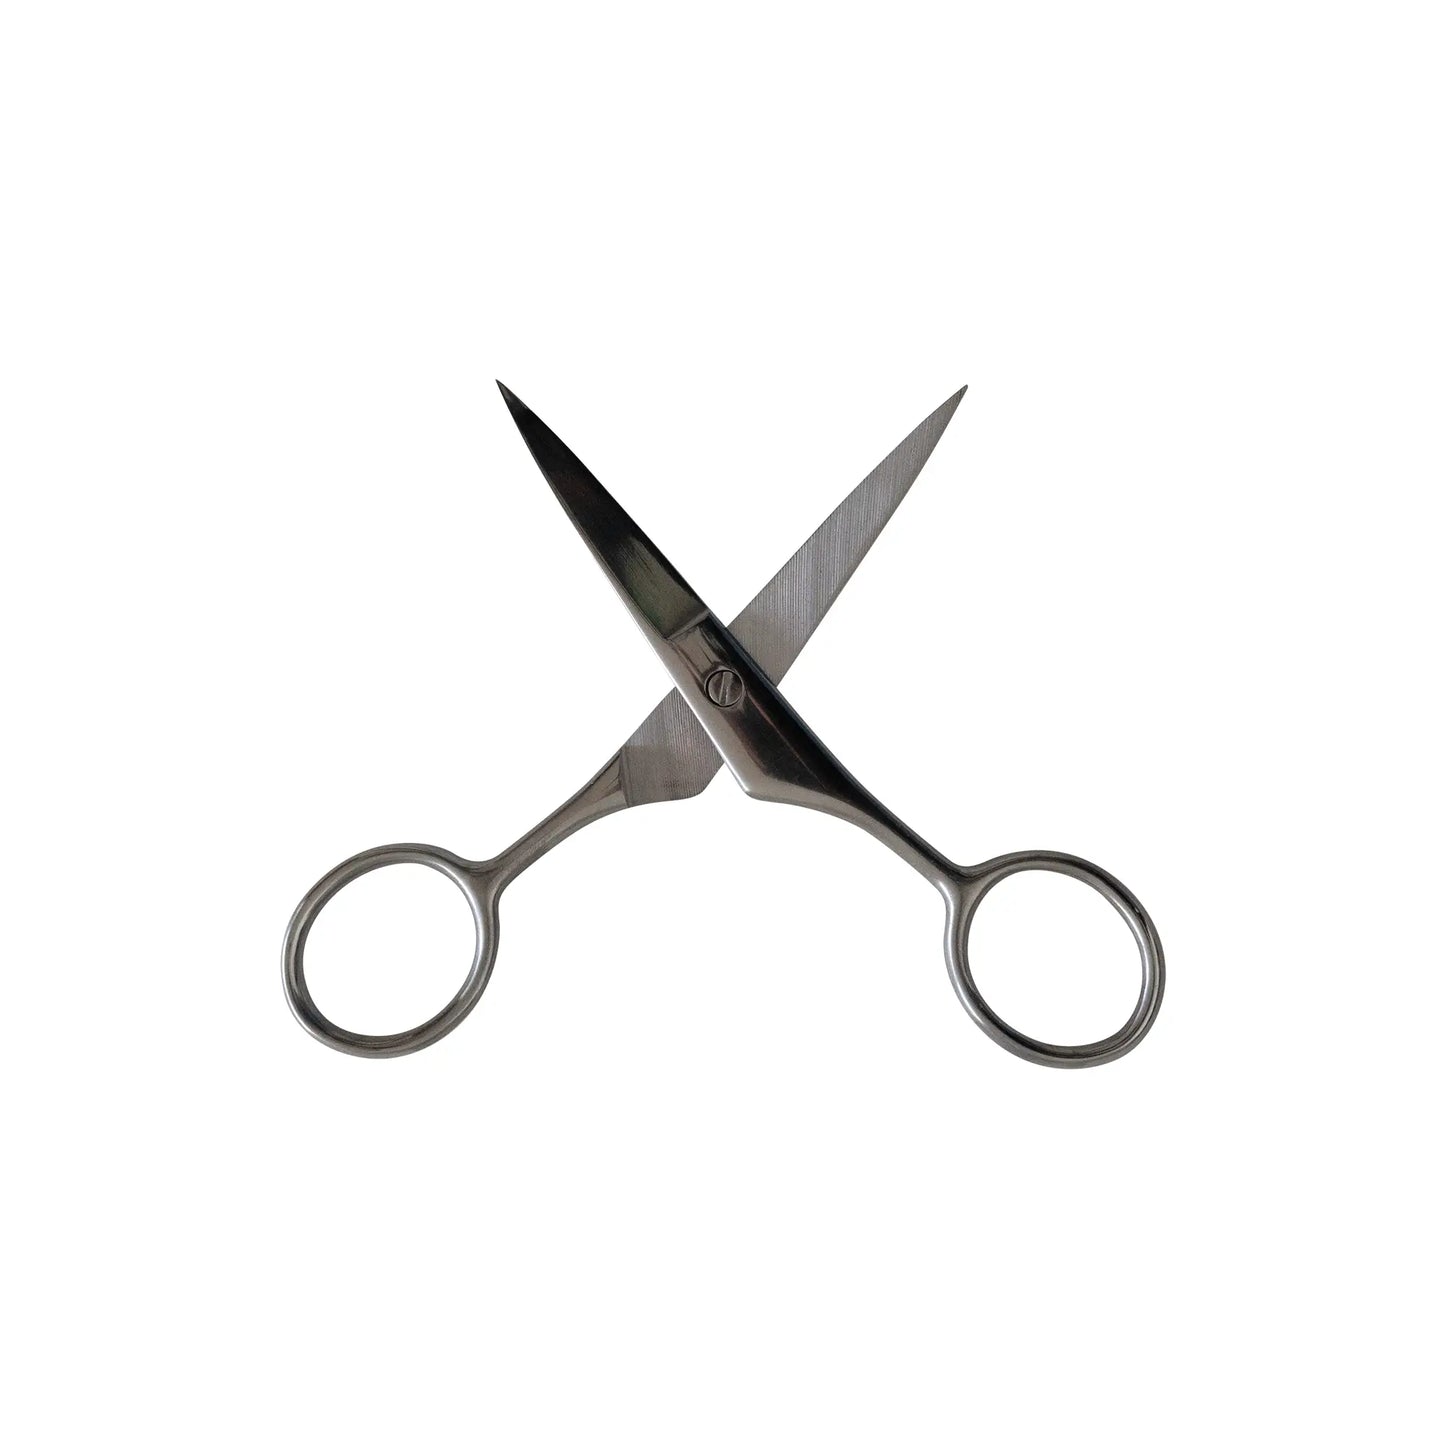 Cruisin Organics Pro scissors are stainless steel scissors for a refined beard trim. Precision tips ensure you're only trimming unwanted hair. The finger-loop design offers optimal control when you’re looking to get the best results. These scissors feature straight blades for comfortable, sharp trims. These professional scissors are made with high-quality stainless steel and have sharp, straight blades to work on any skin type. Add to your Cruisin Organics collection today.